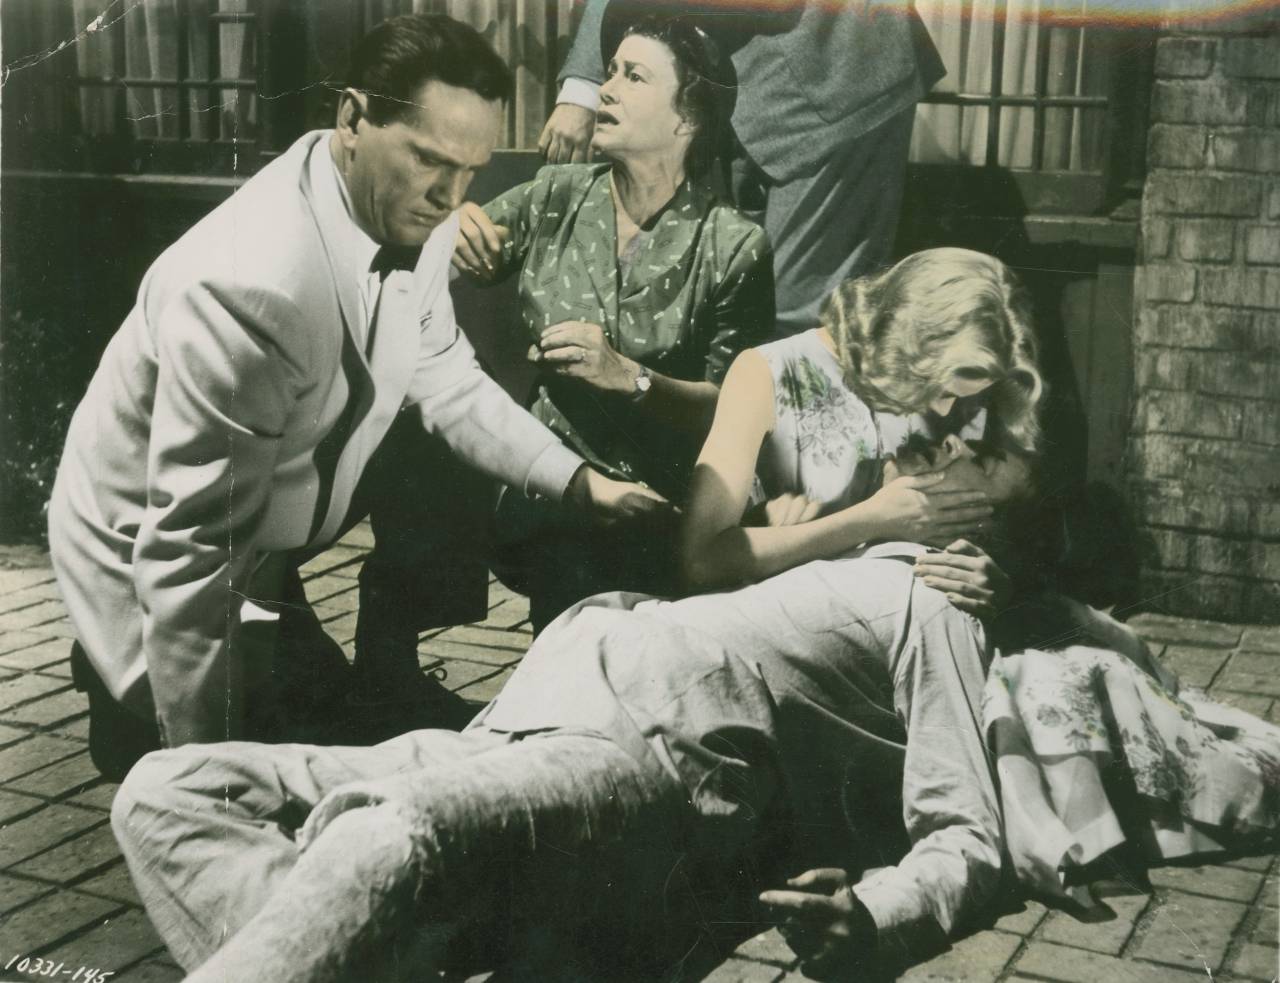 Wendell Corey, Thelma Ritter, Grace Kelly and James Stewart in Rear window directed by Alfred Hitchcock, 1954